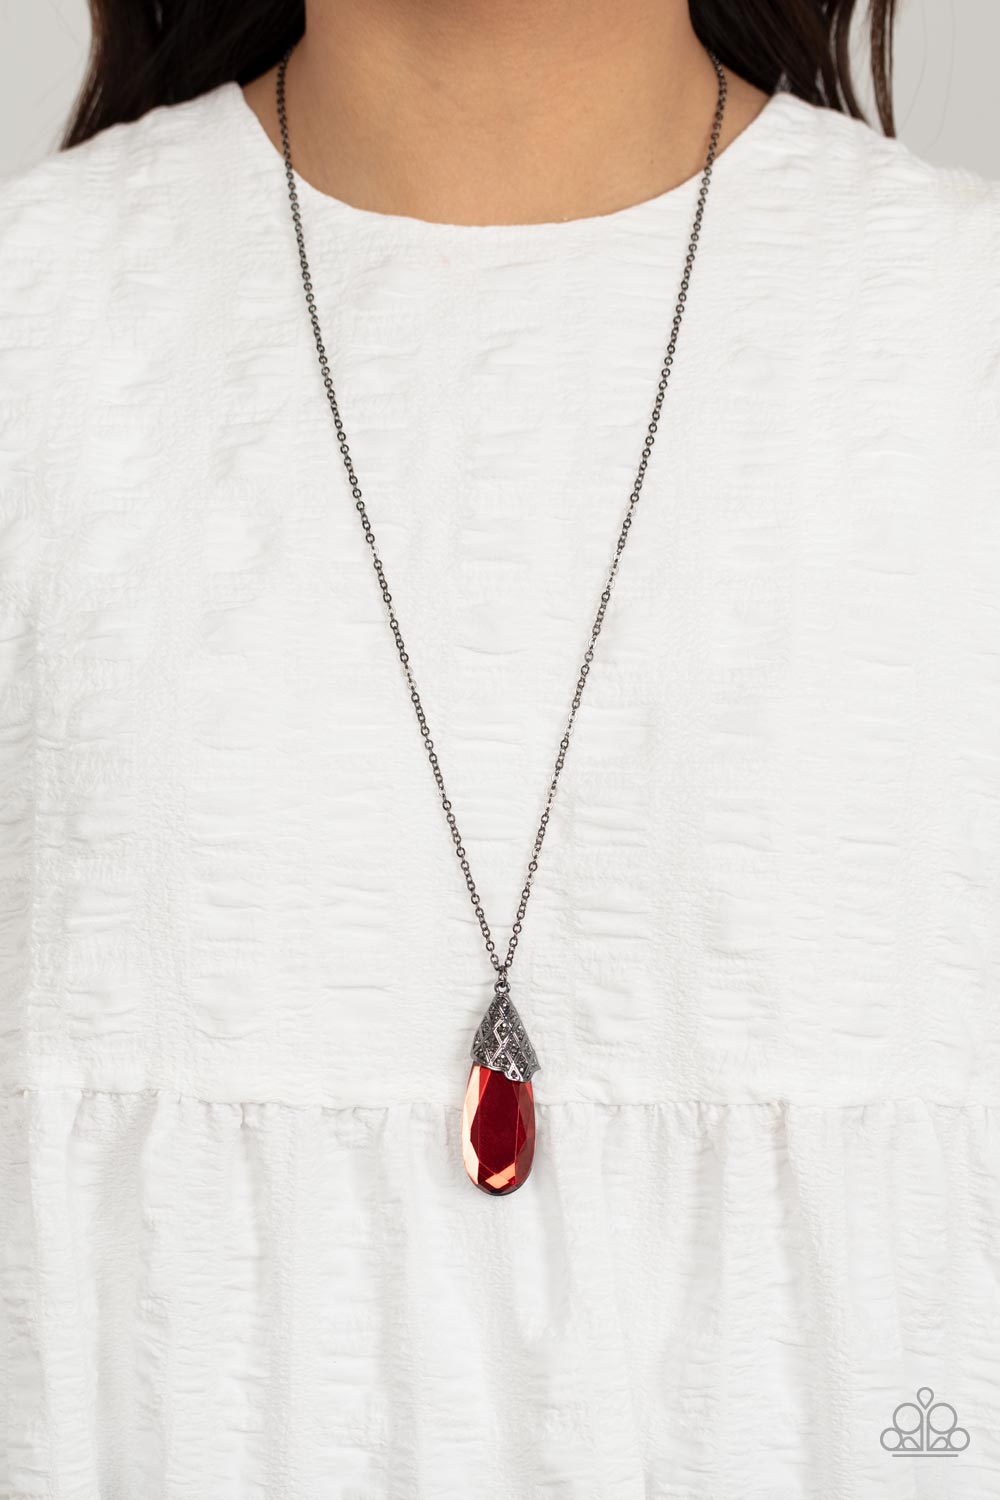 Dibs on the Dazzle - Red and Gunmetal Necklace- Paparazzi Accessories